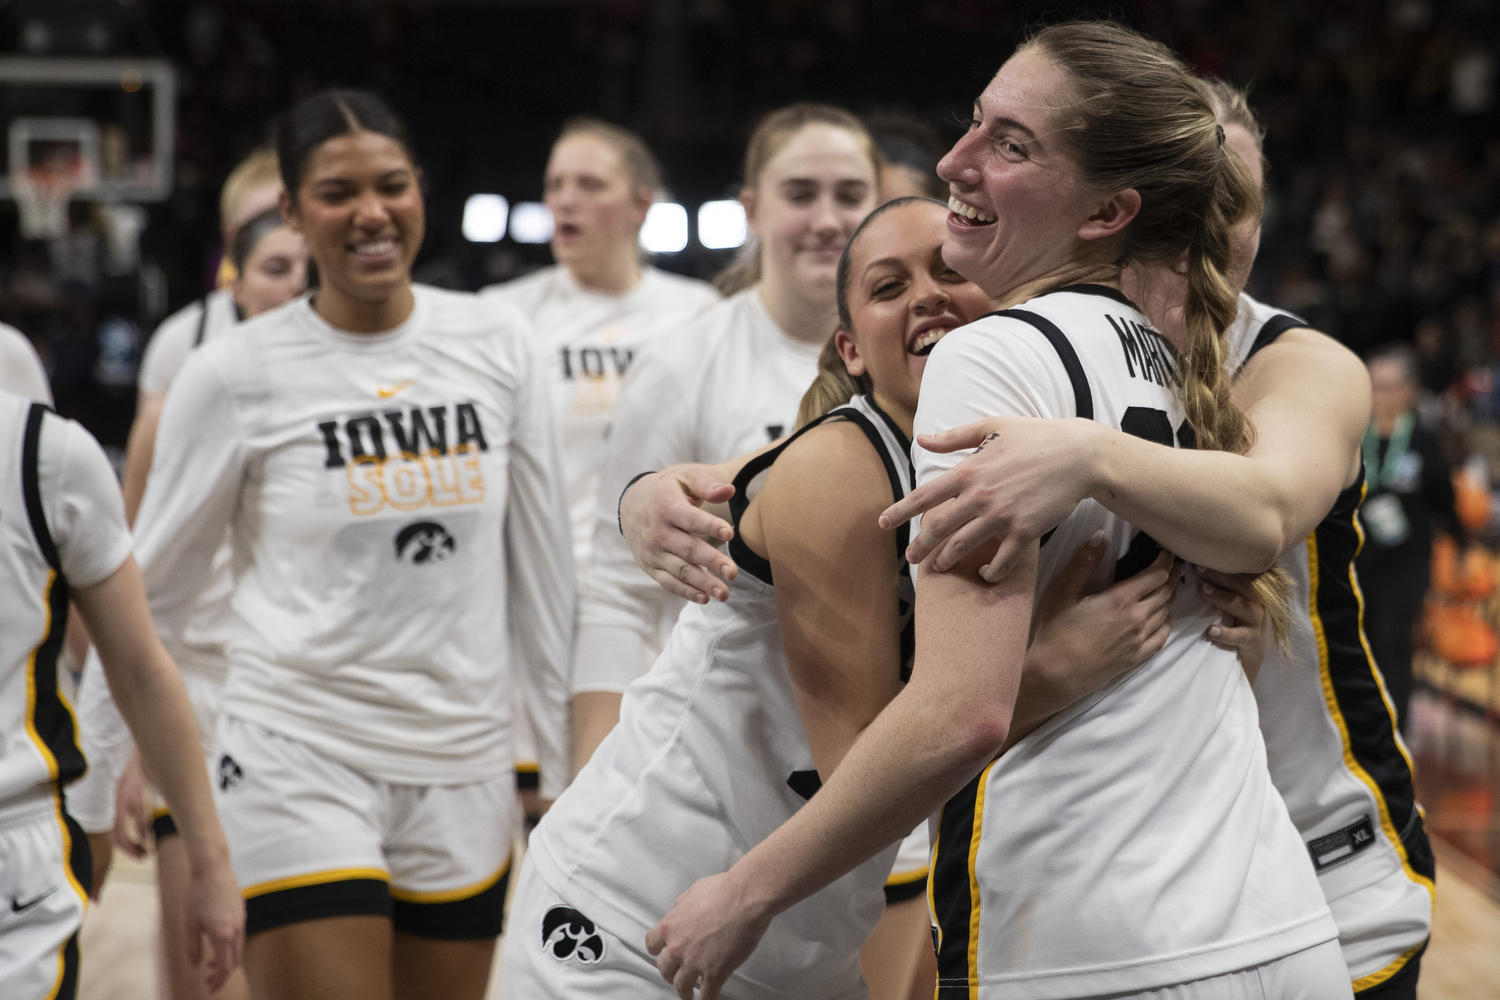 Where To Watch Iowa Women S Basketball Take On Maryland In The Big Ten Tournament Semifinals